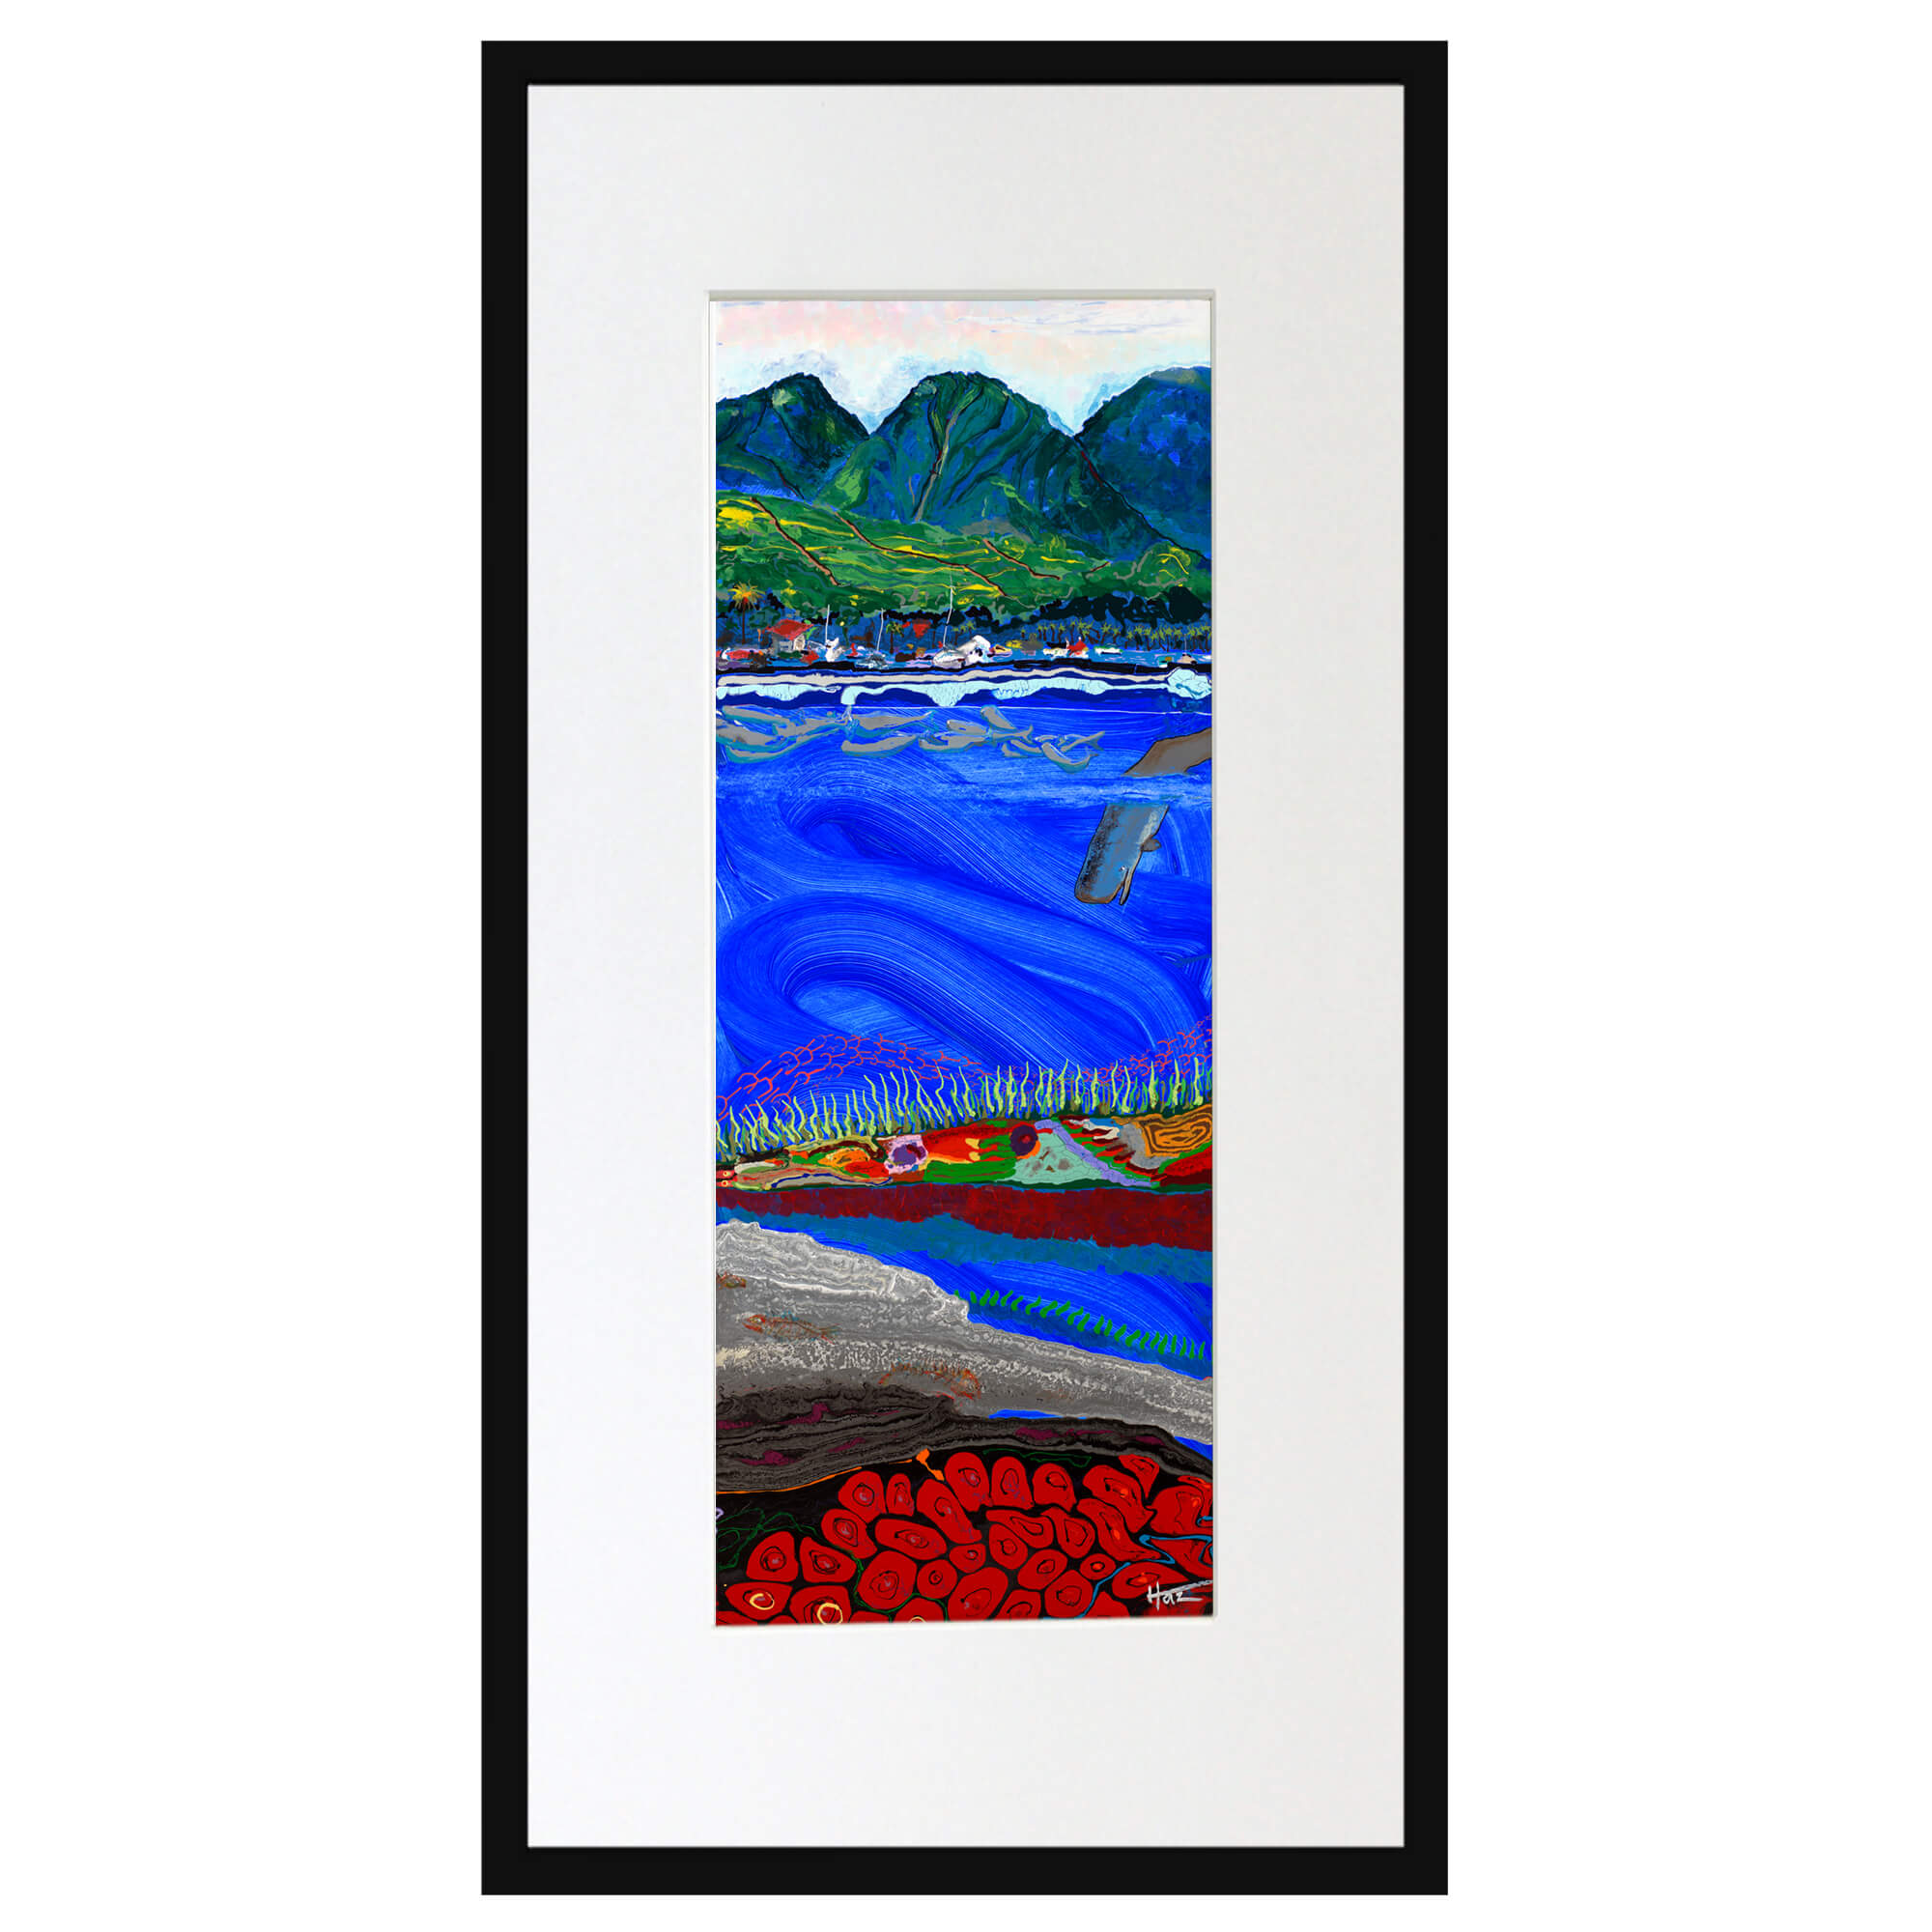 Matted art print with black frame showcasing the ocean water with fish and a whale by hawaii artist robert hazzard